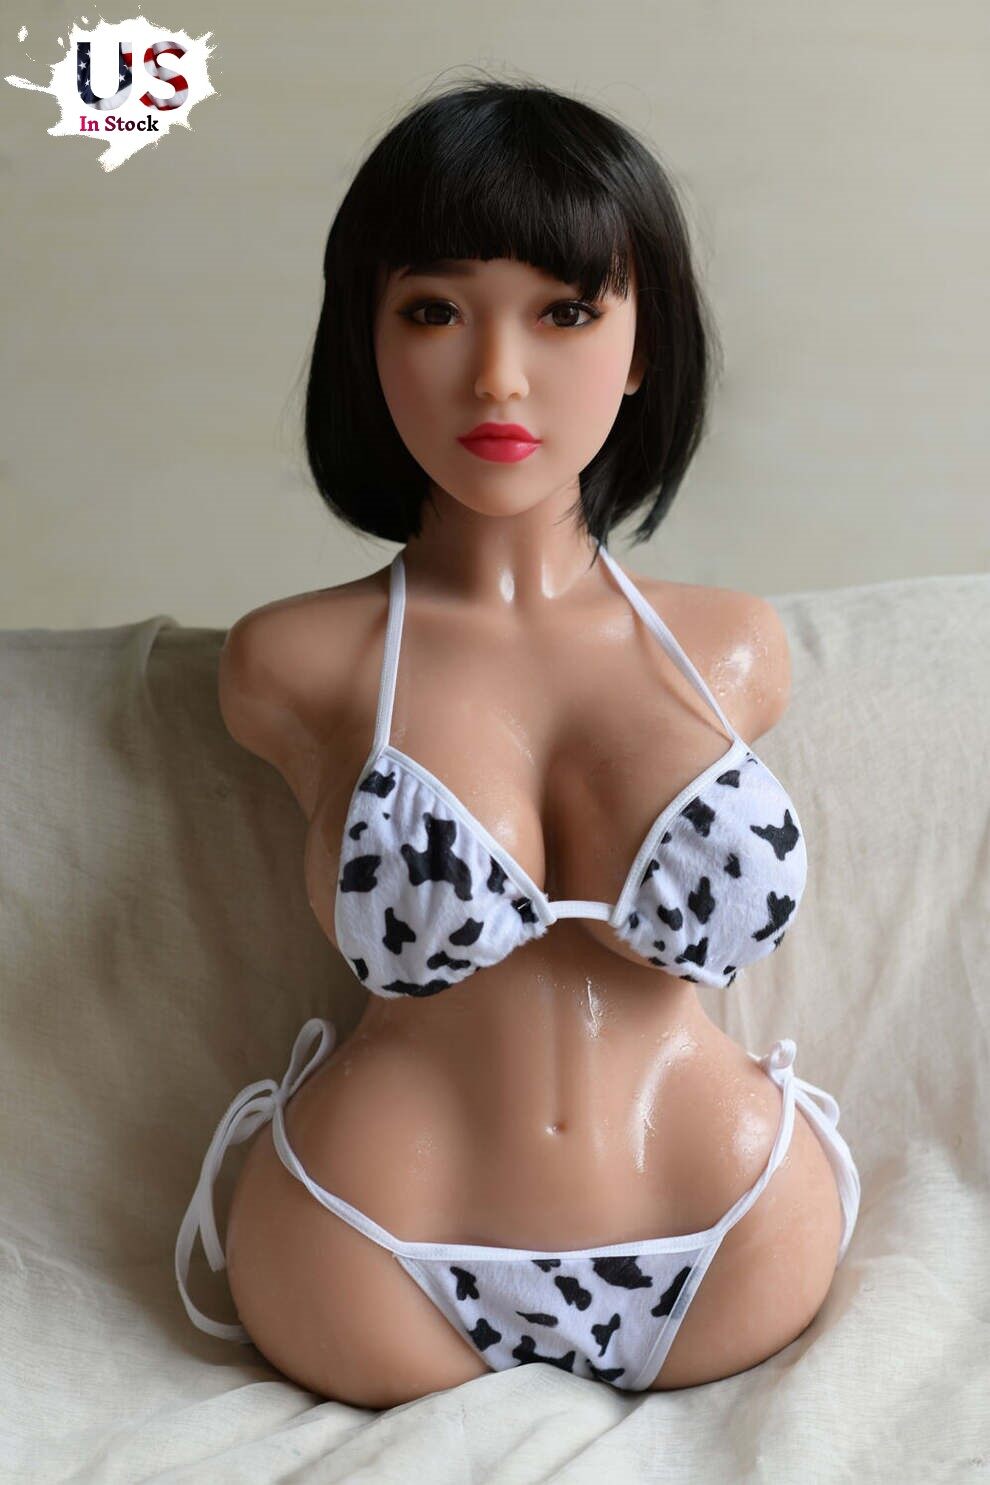 April 66cm(2ft2) G-Cup 6YE Premium Nice Buttocks TPE Sex Doll (US In Stock) image1